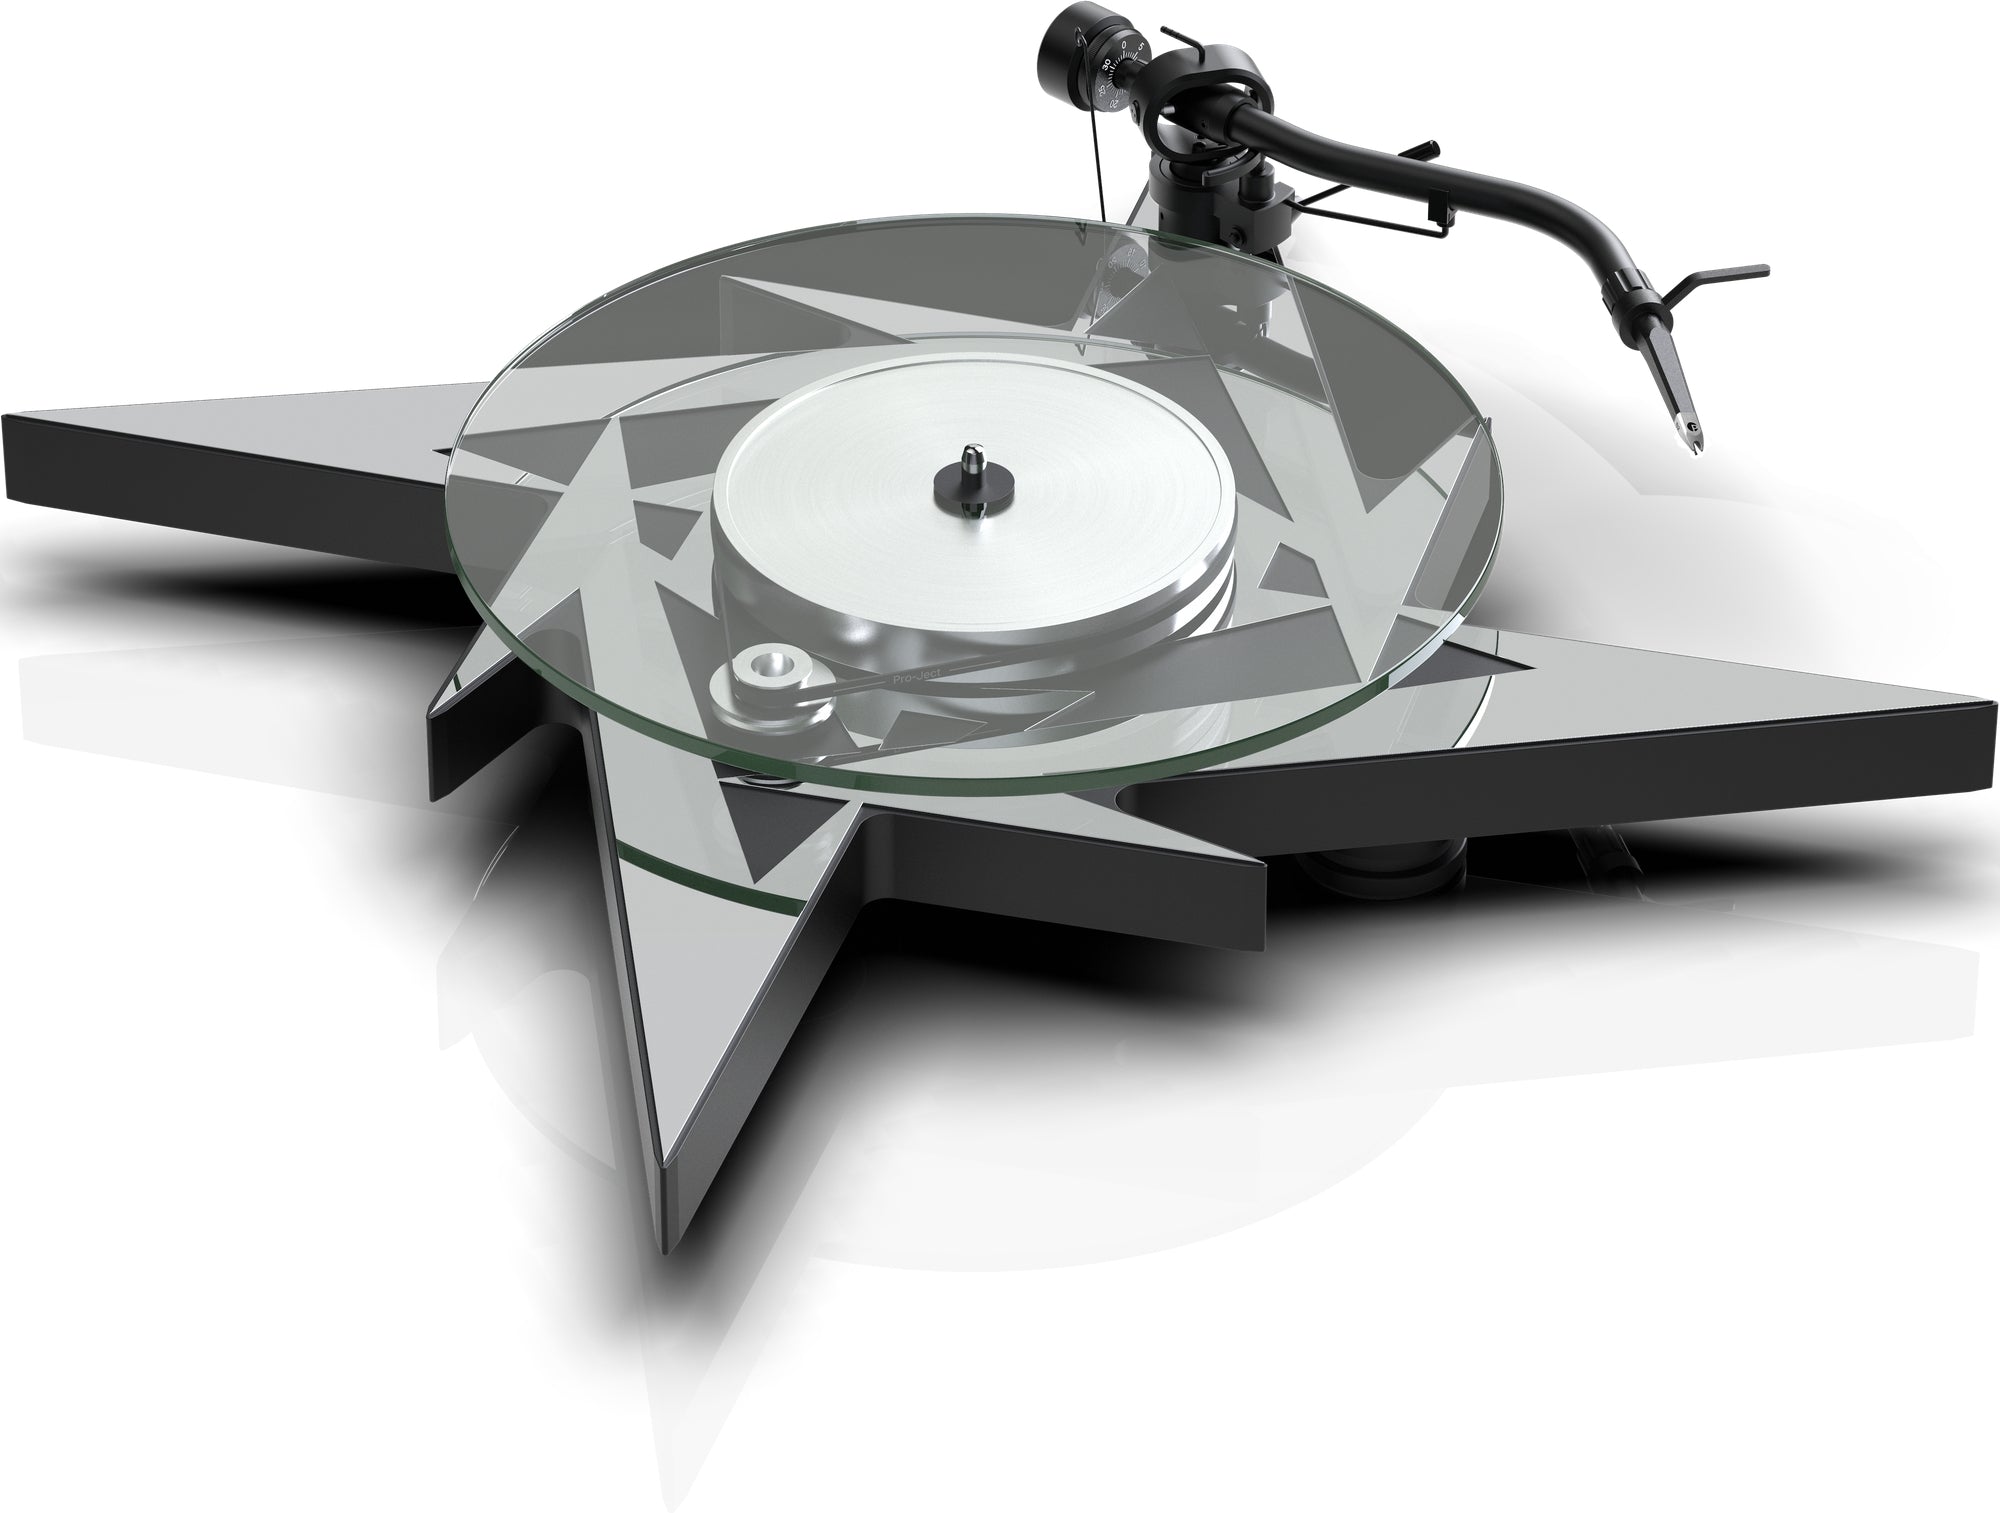 PRO-JECT METALLICA LIMITED EDITION TURNTABLE WITH PICK IT S2 C CARTRIDGE